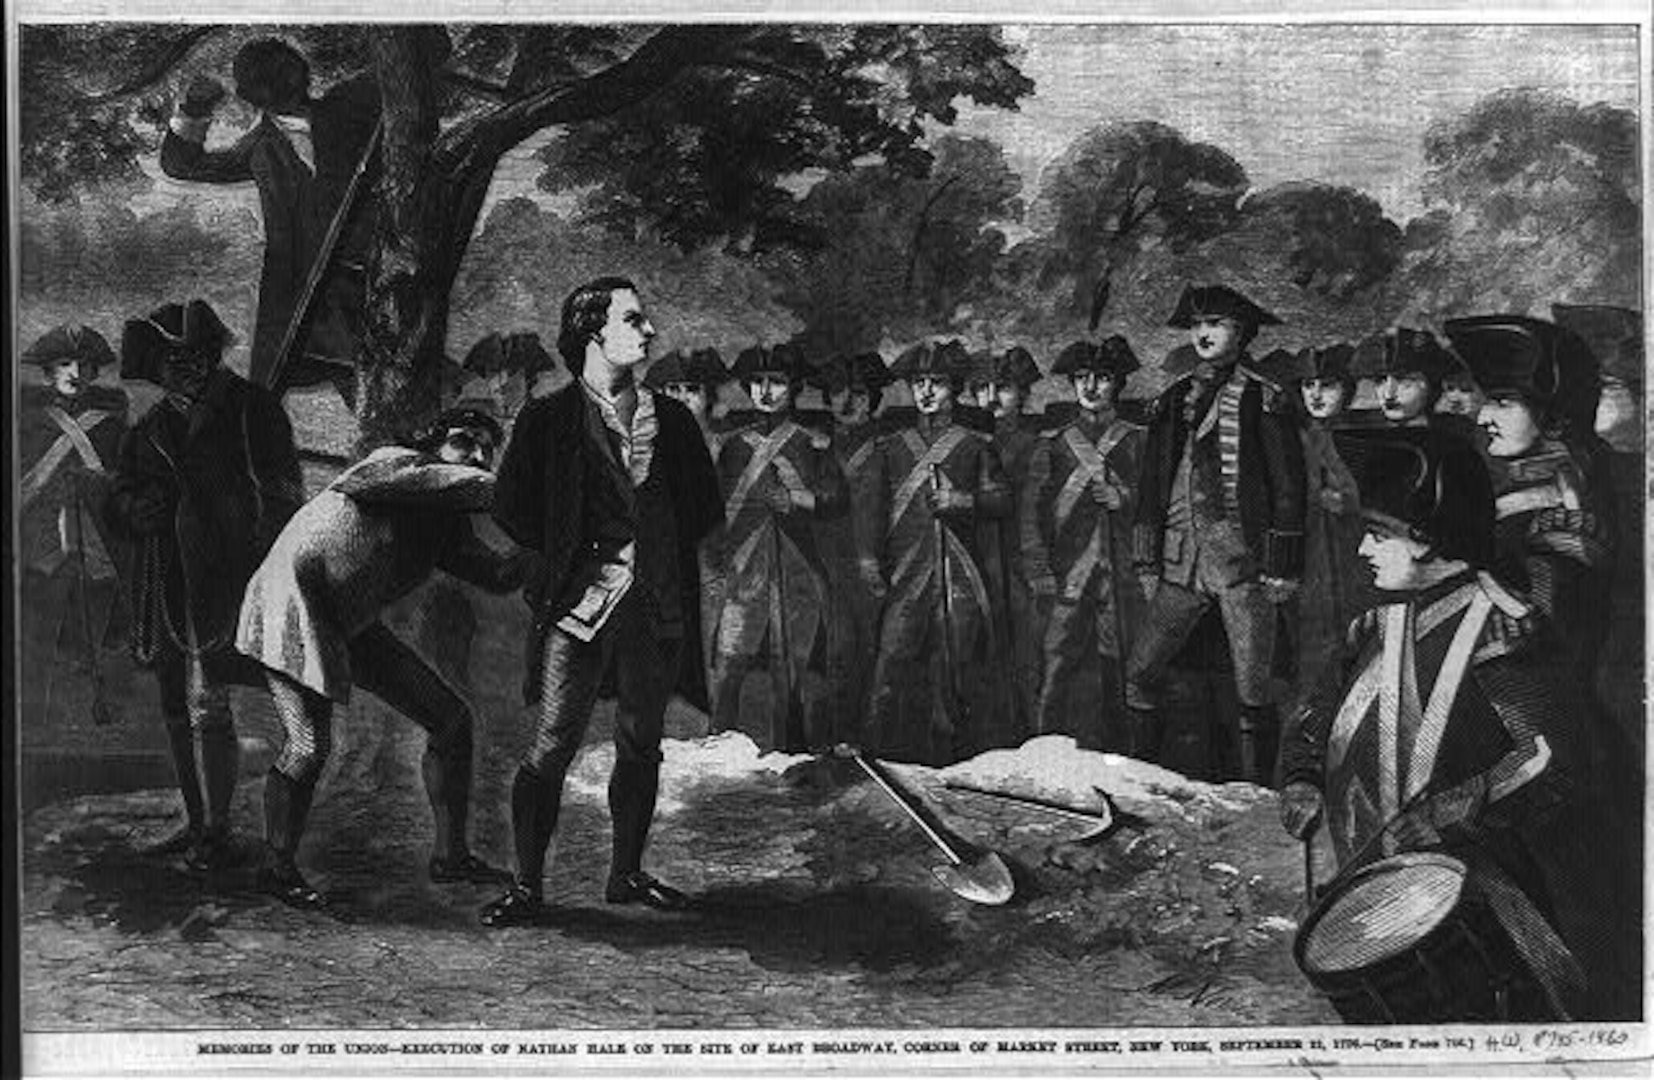 Memories of the Union - execution of Nathan Hale on the site of east Broadway, corner of Market Street, New York, September 21, 1776 / M. Nevin.